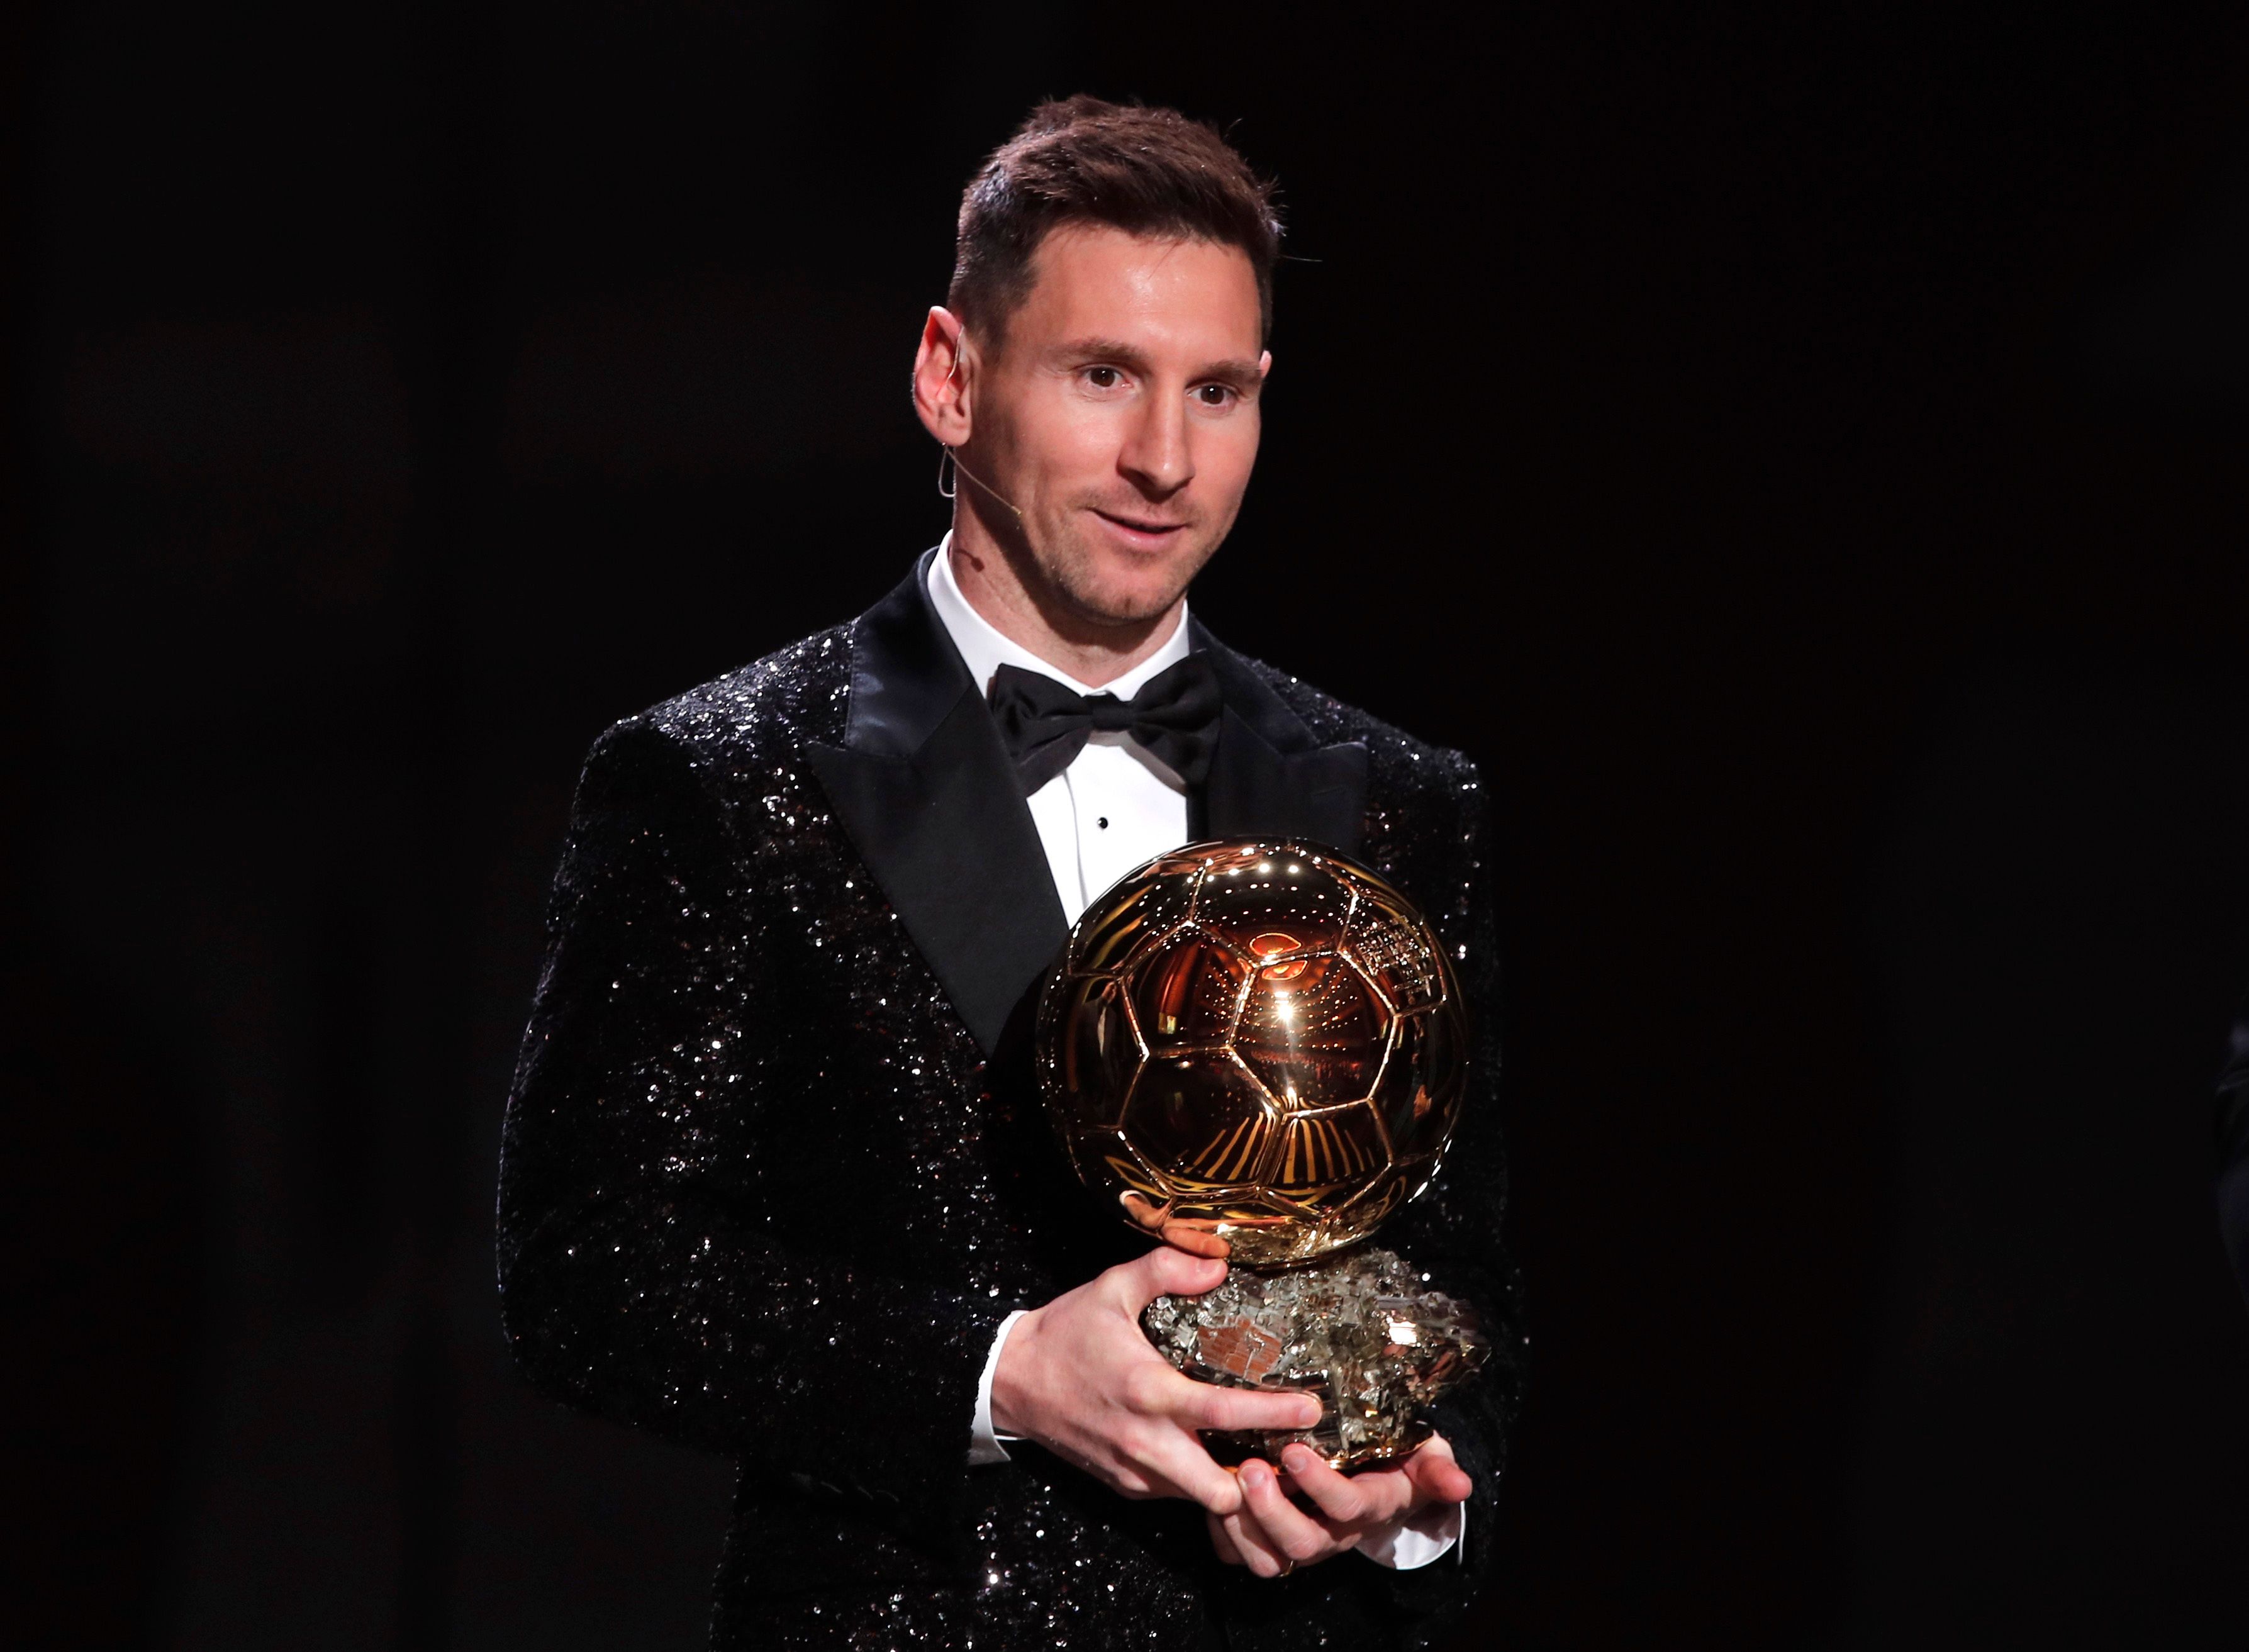 Lionel Messi poses with the Ballon d'Or